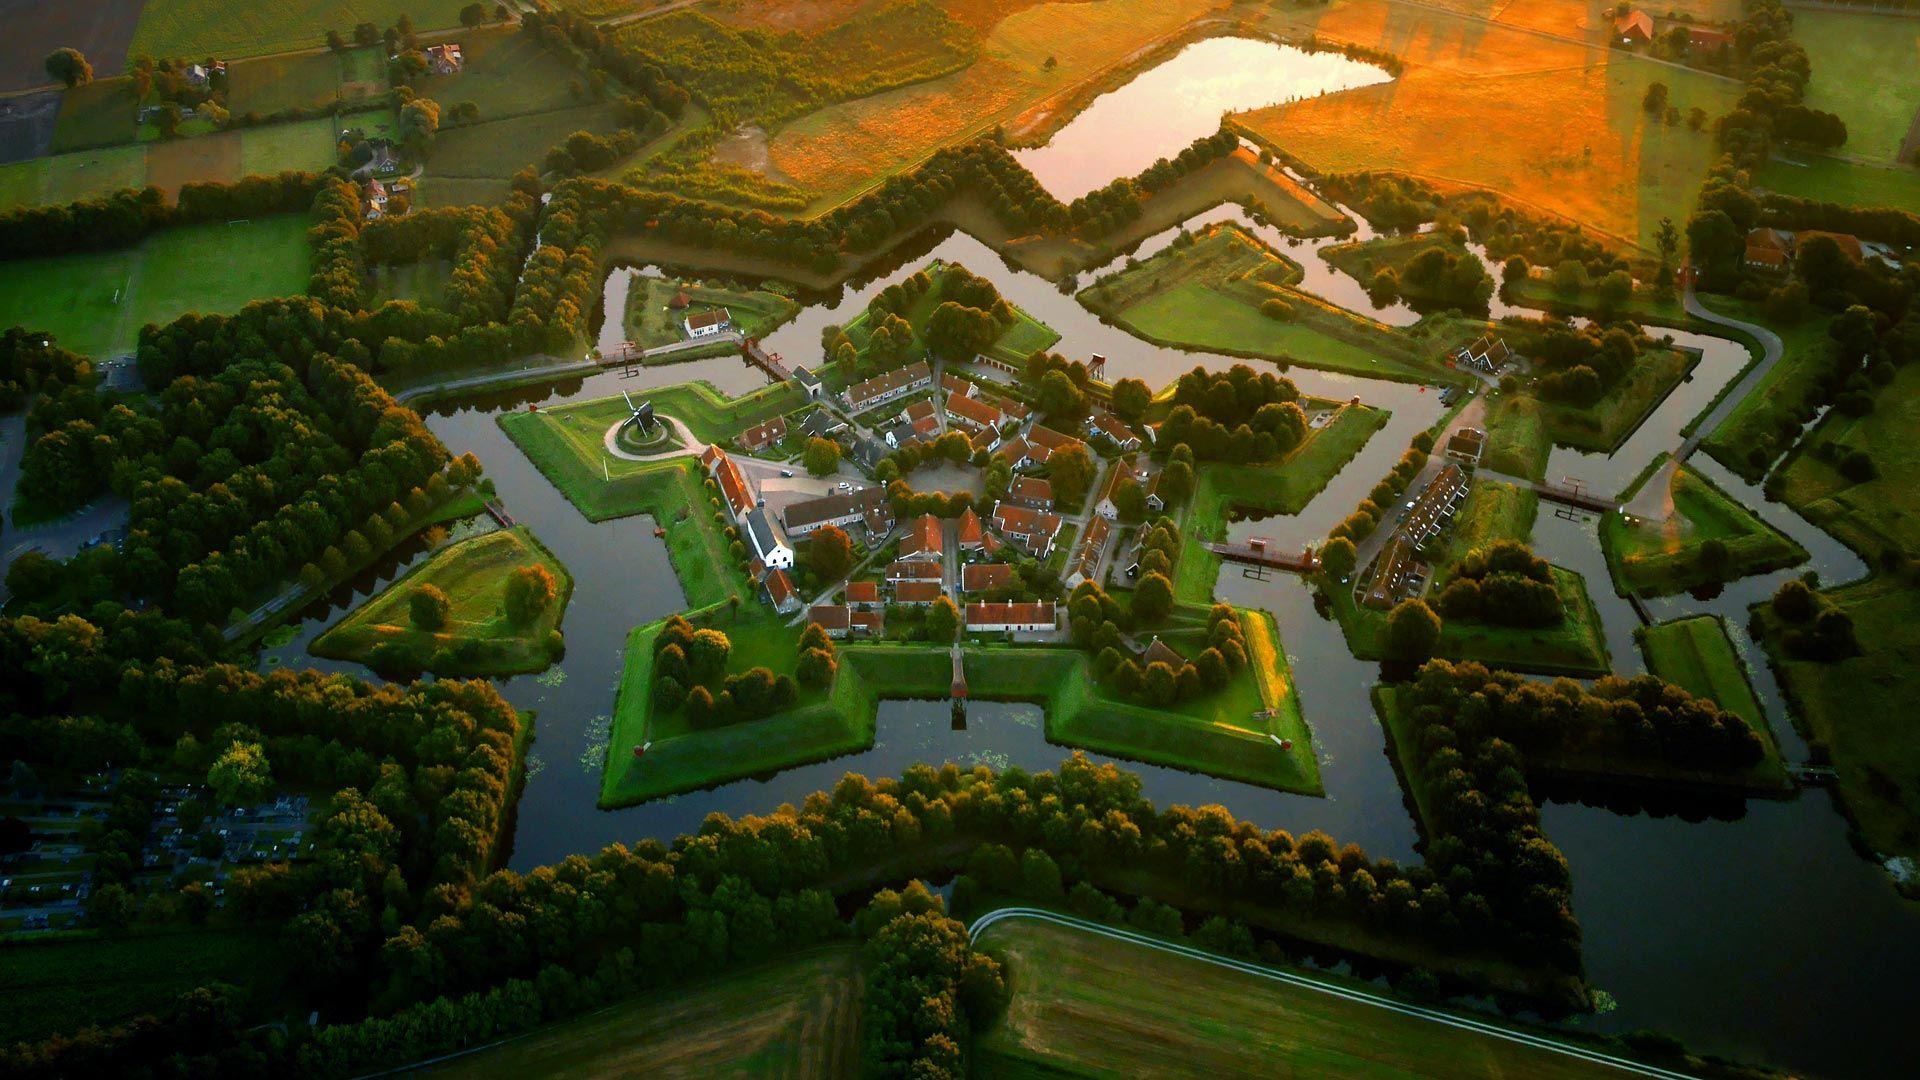 Fort Bourtange, Netherlands, by Amos Chapple [1920x1080]